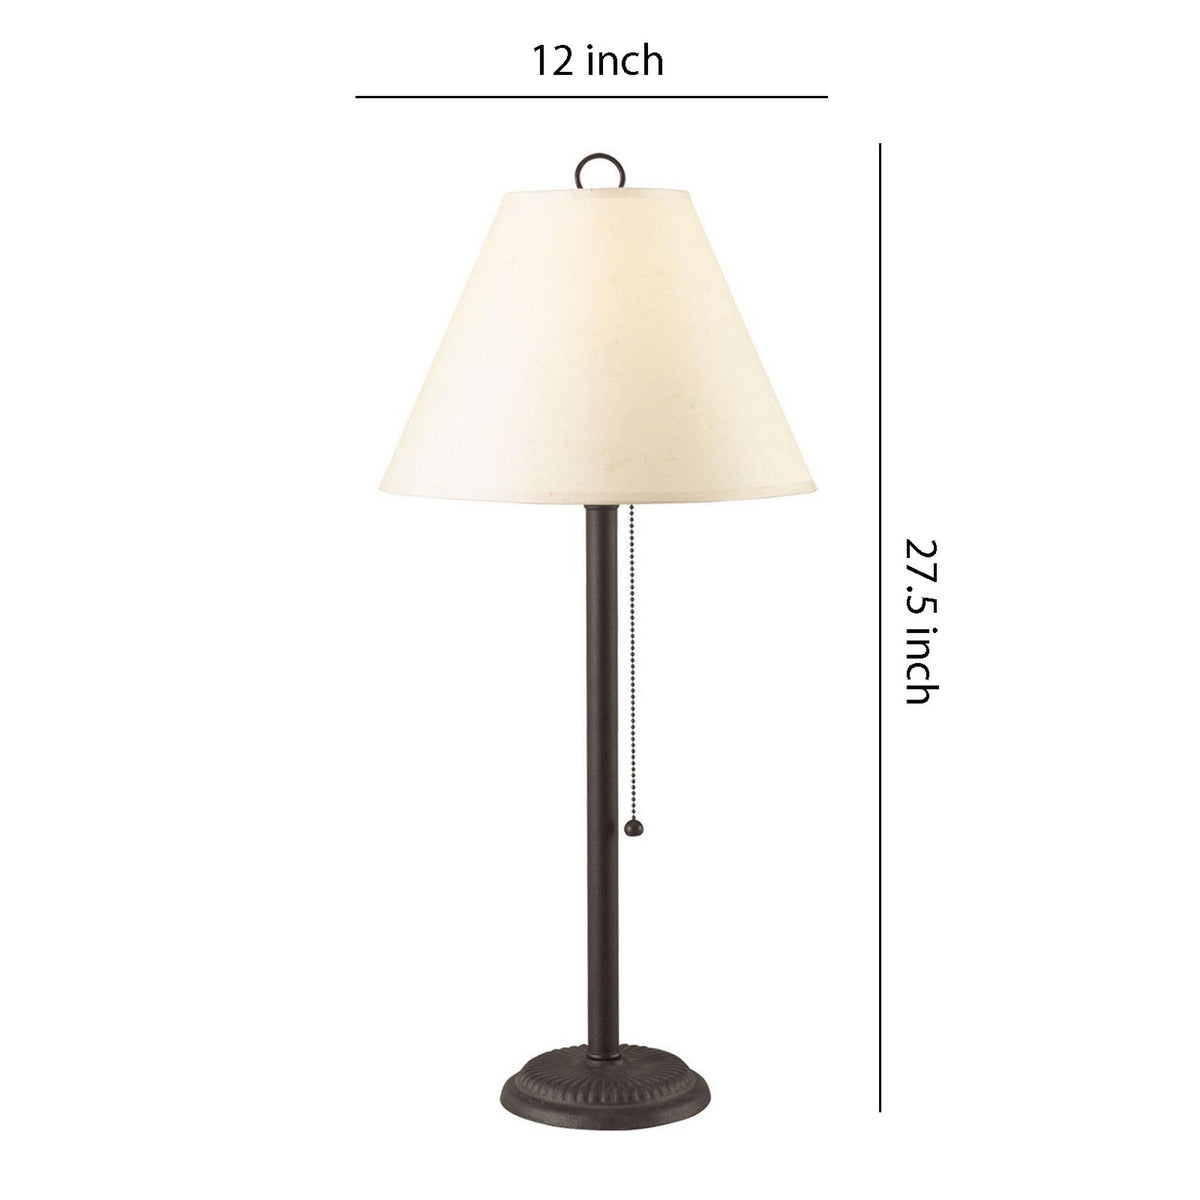 Paper Shade Metal Table Lamp with Pull Chain Switch,Set of 4,White and Black - BM220650